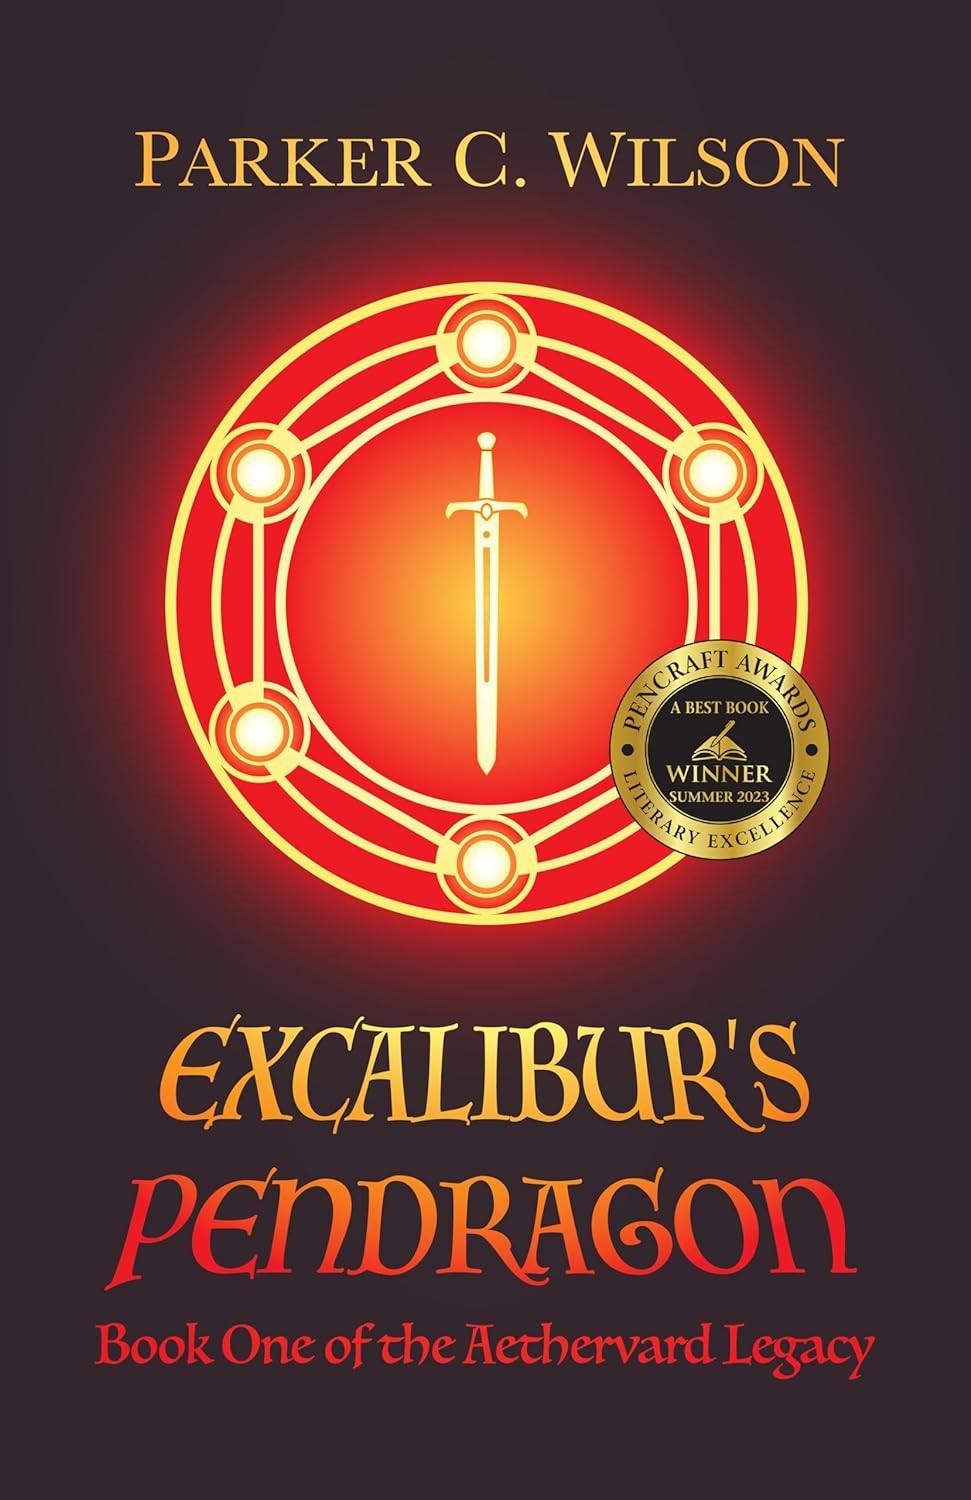 Embark on an Epic Quest in "Excalibur's Pendragon: Book One of the Aethervard Legacy"